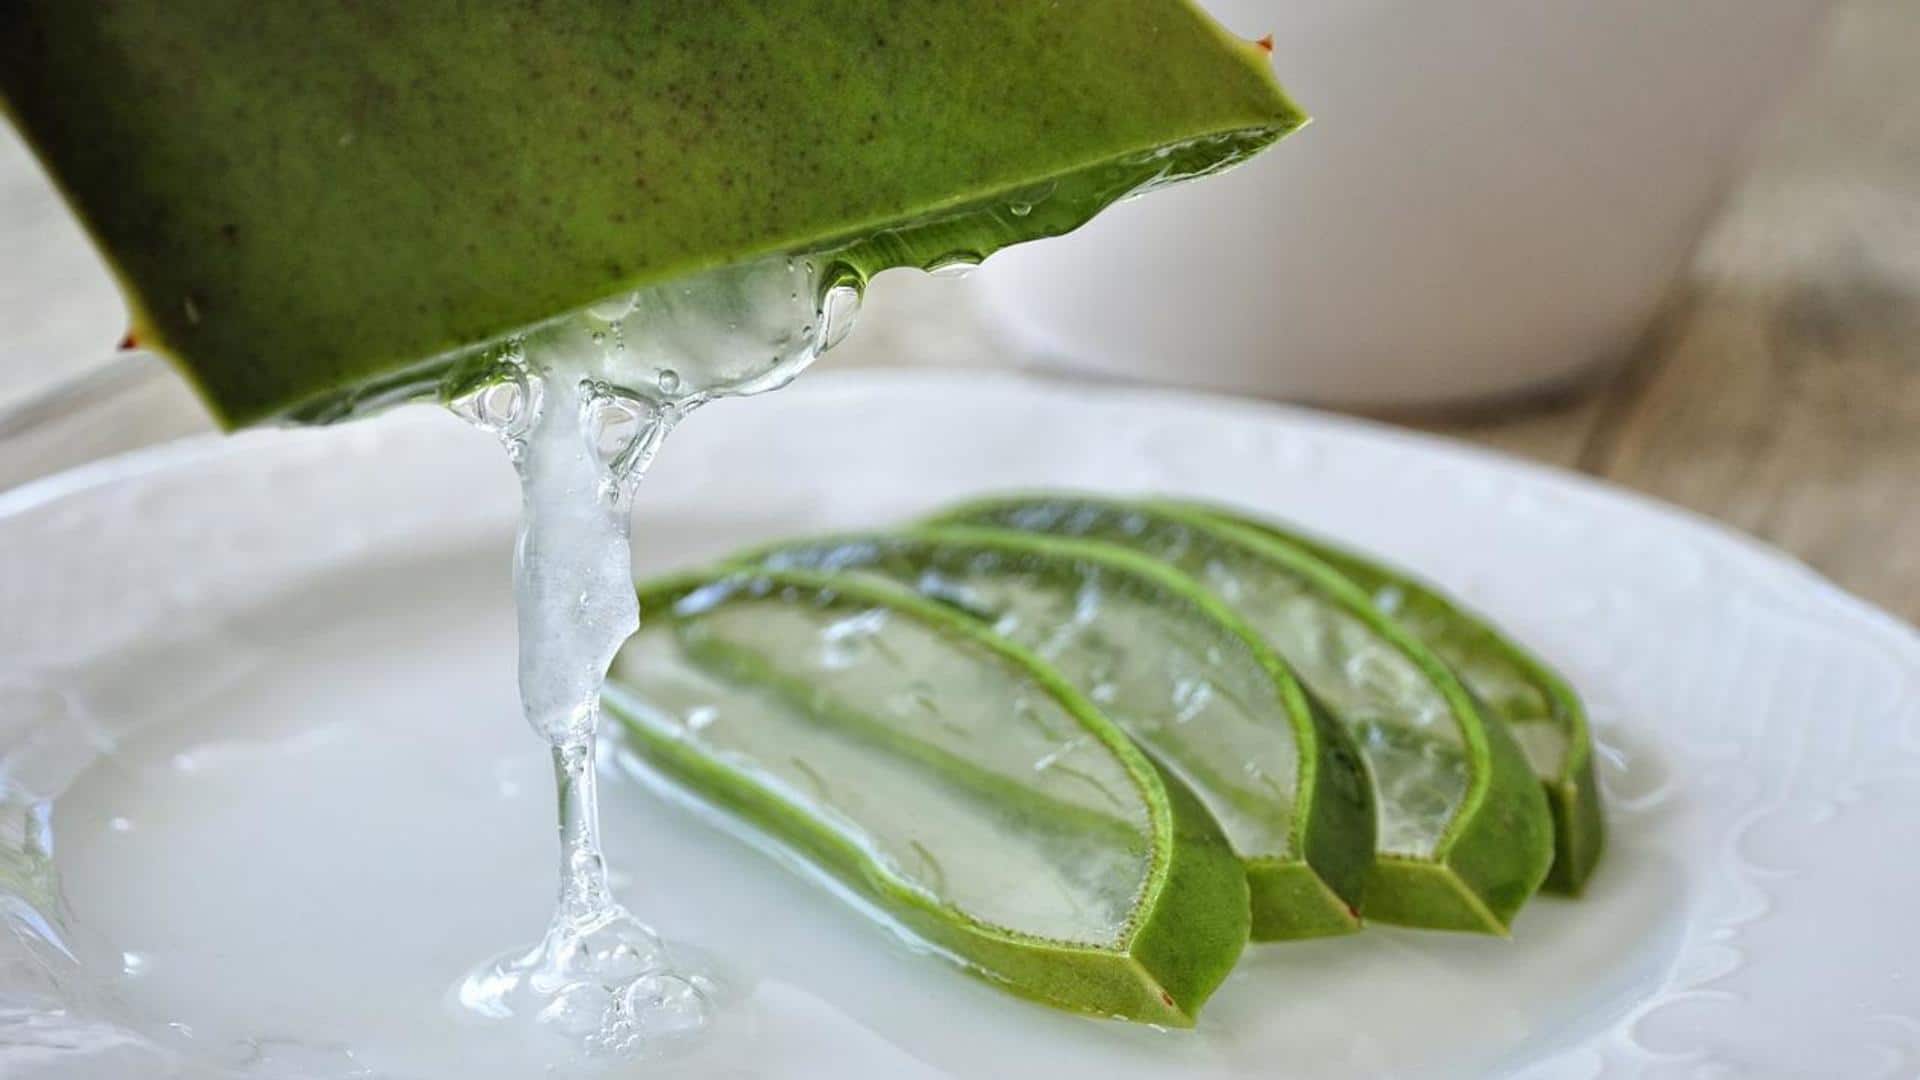 Here's how to add aloe vera to your skincare routine